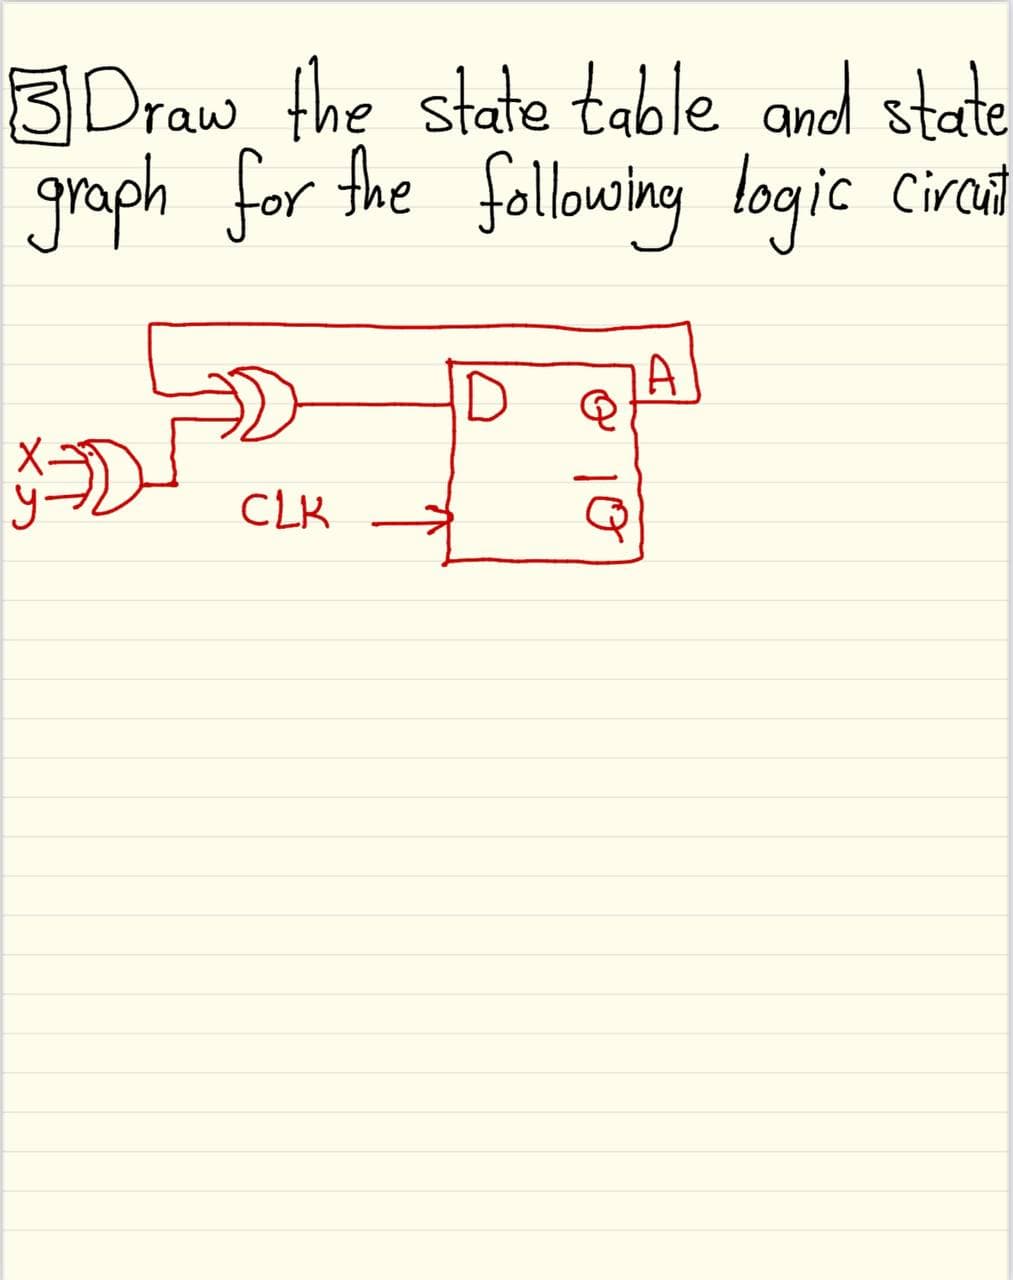 3Draw the state table and state
graph for fhe following logic cirad
A
CLK
